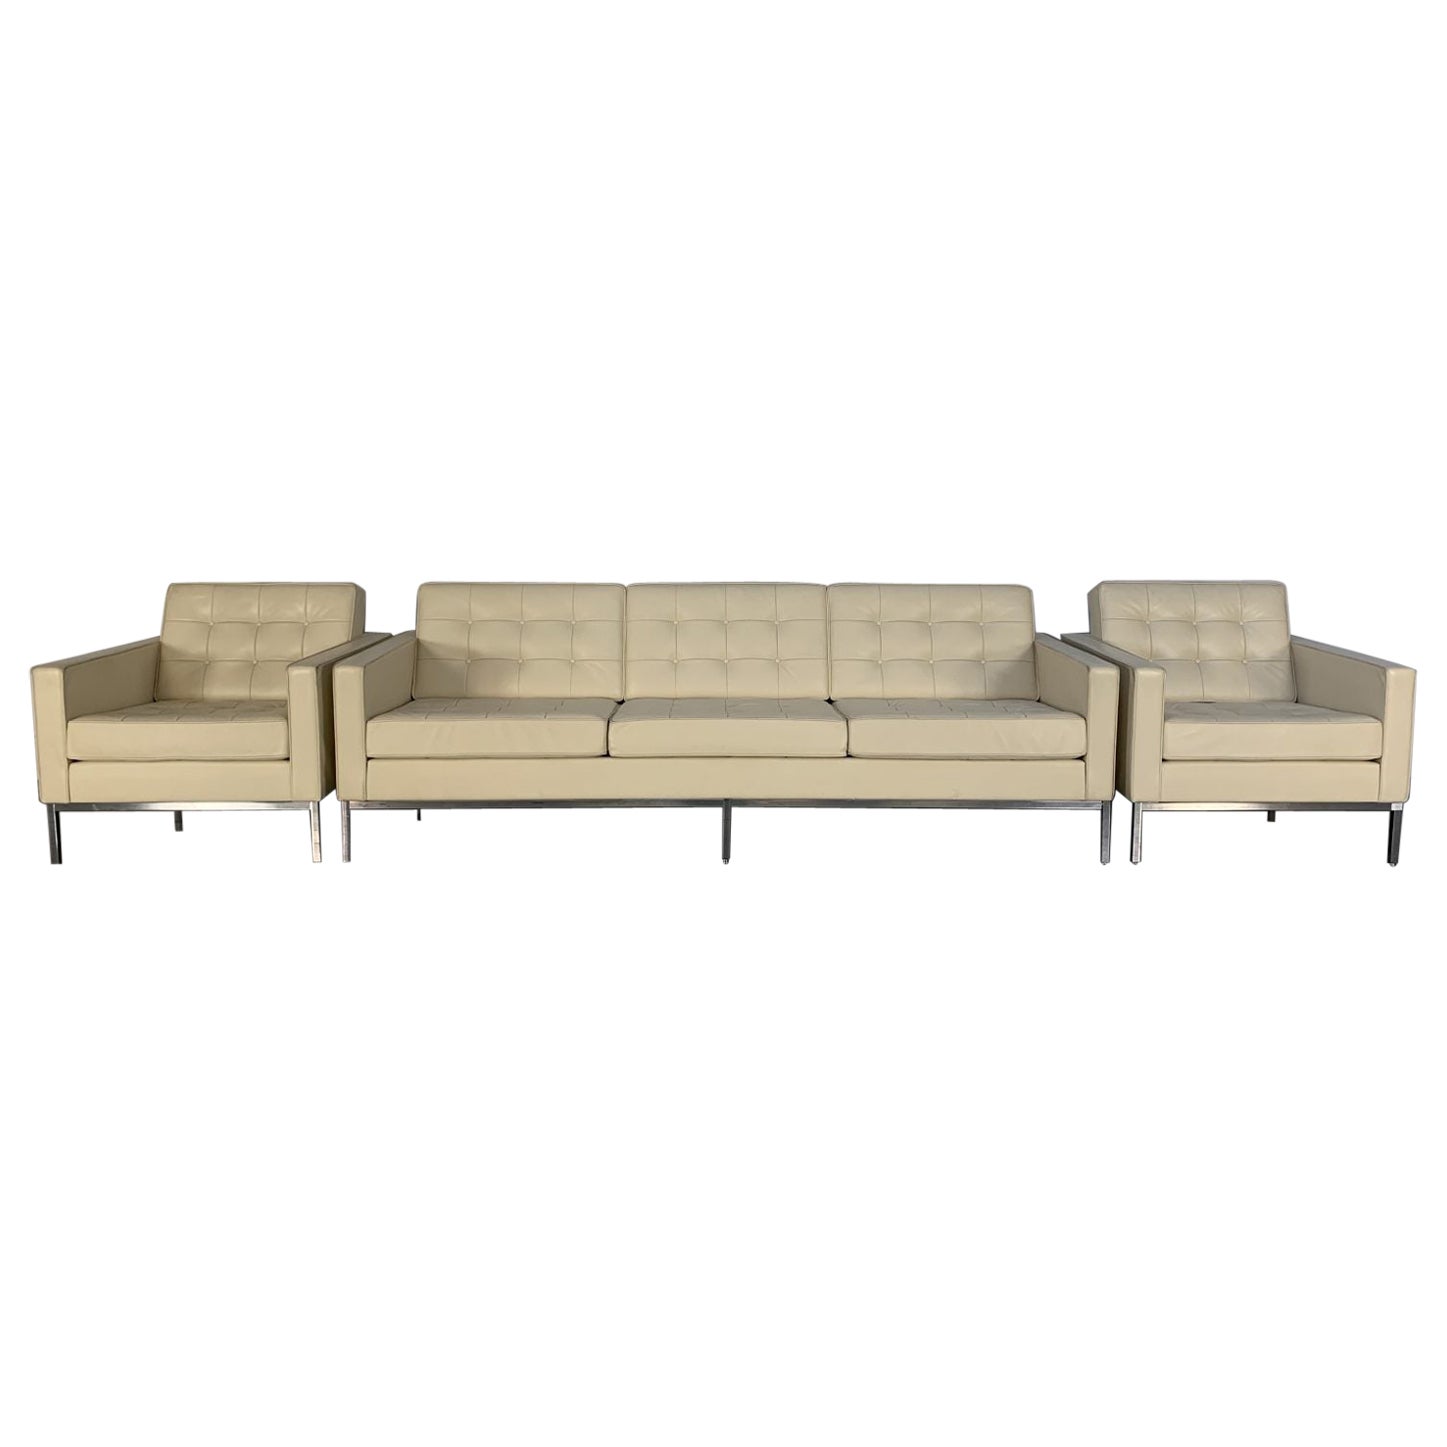 Knoll Studio “Florence Knoll Relax” Sofa & 2 Armchair Suite in “Volo” Leather